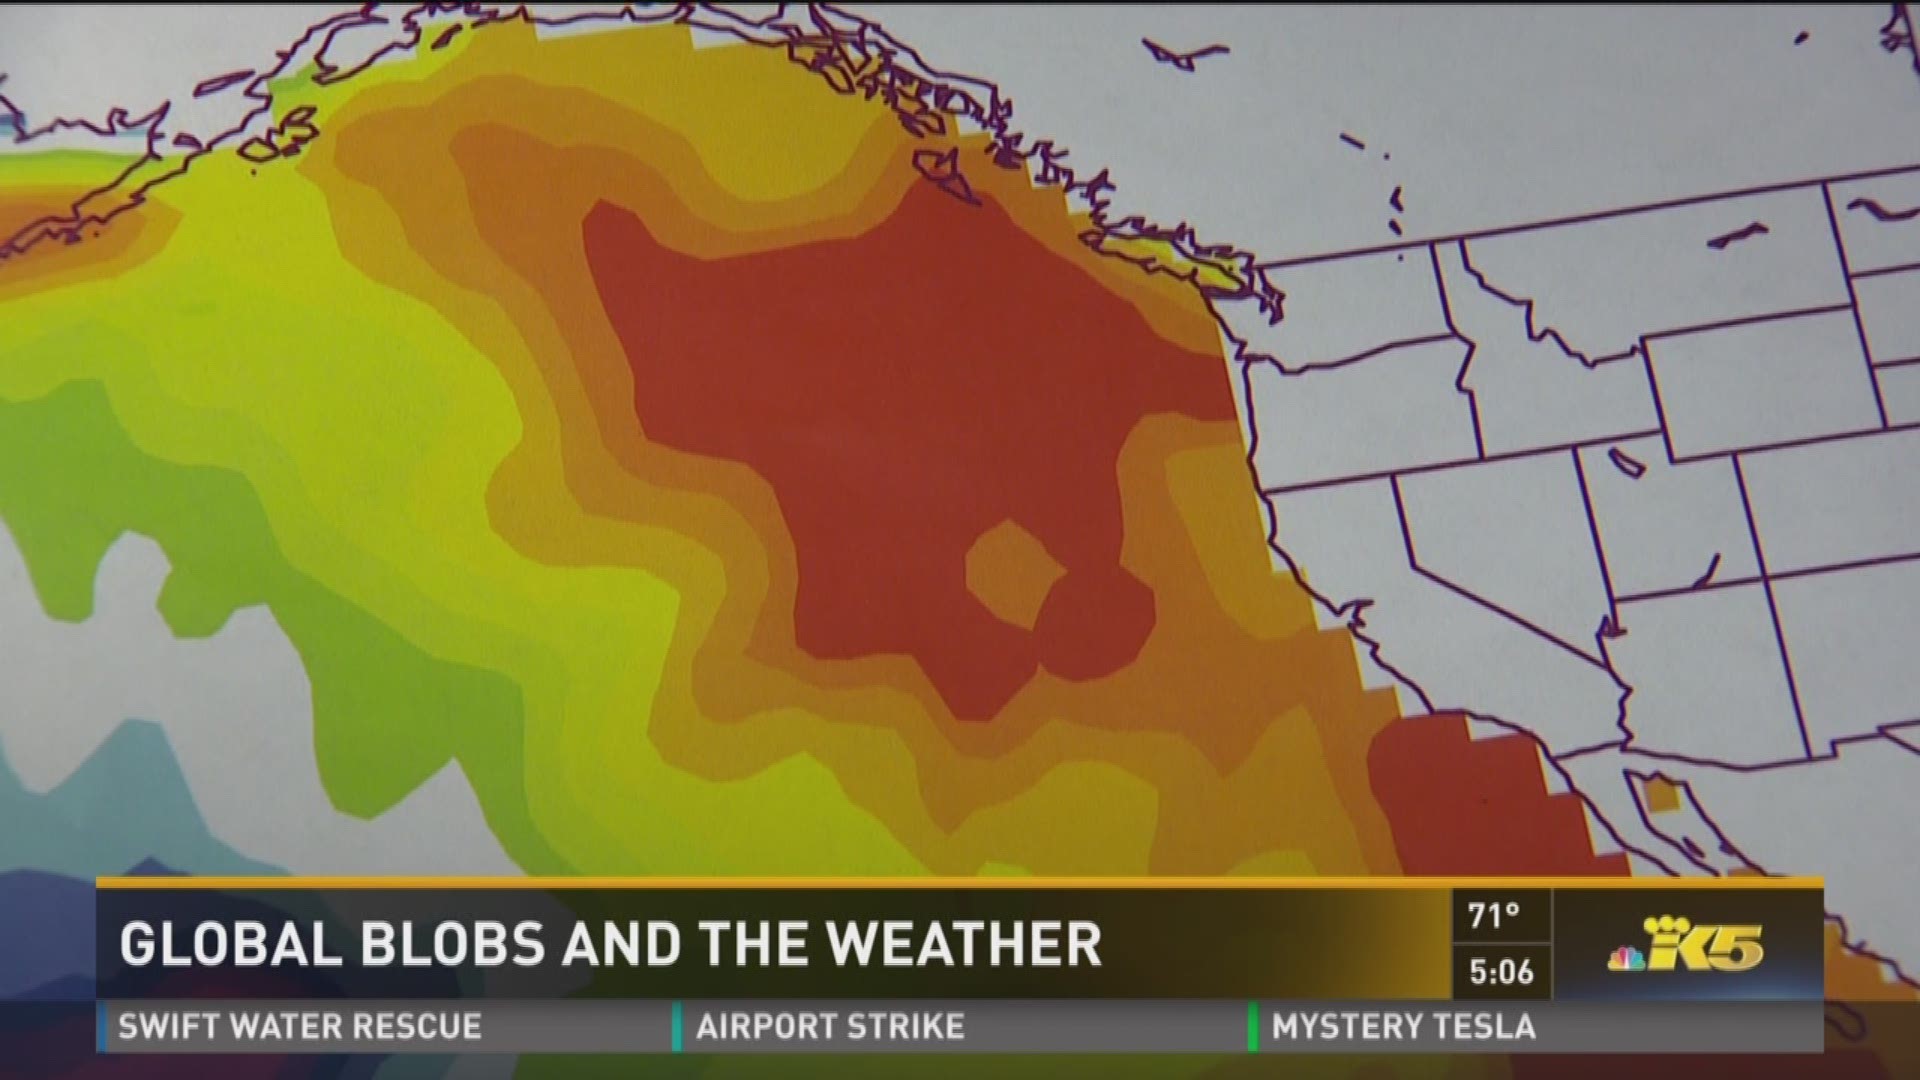 Turns out, "The Blob" that messed with the weather in the Northwest isn't alone.